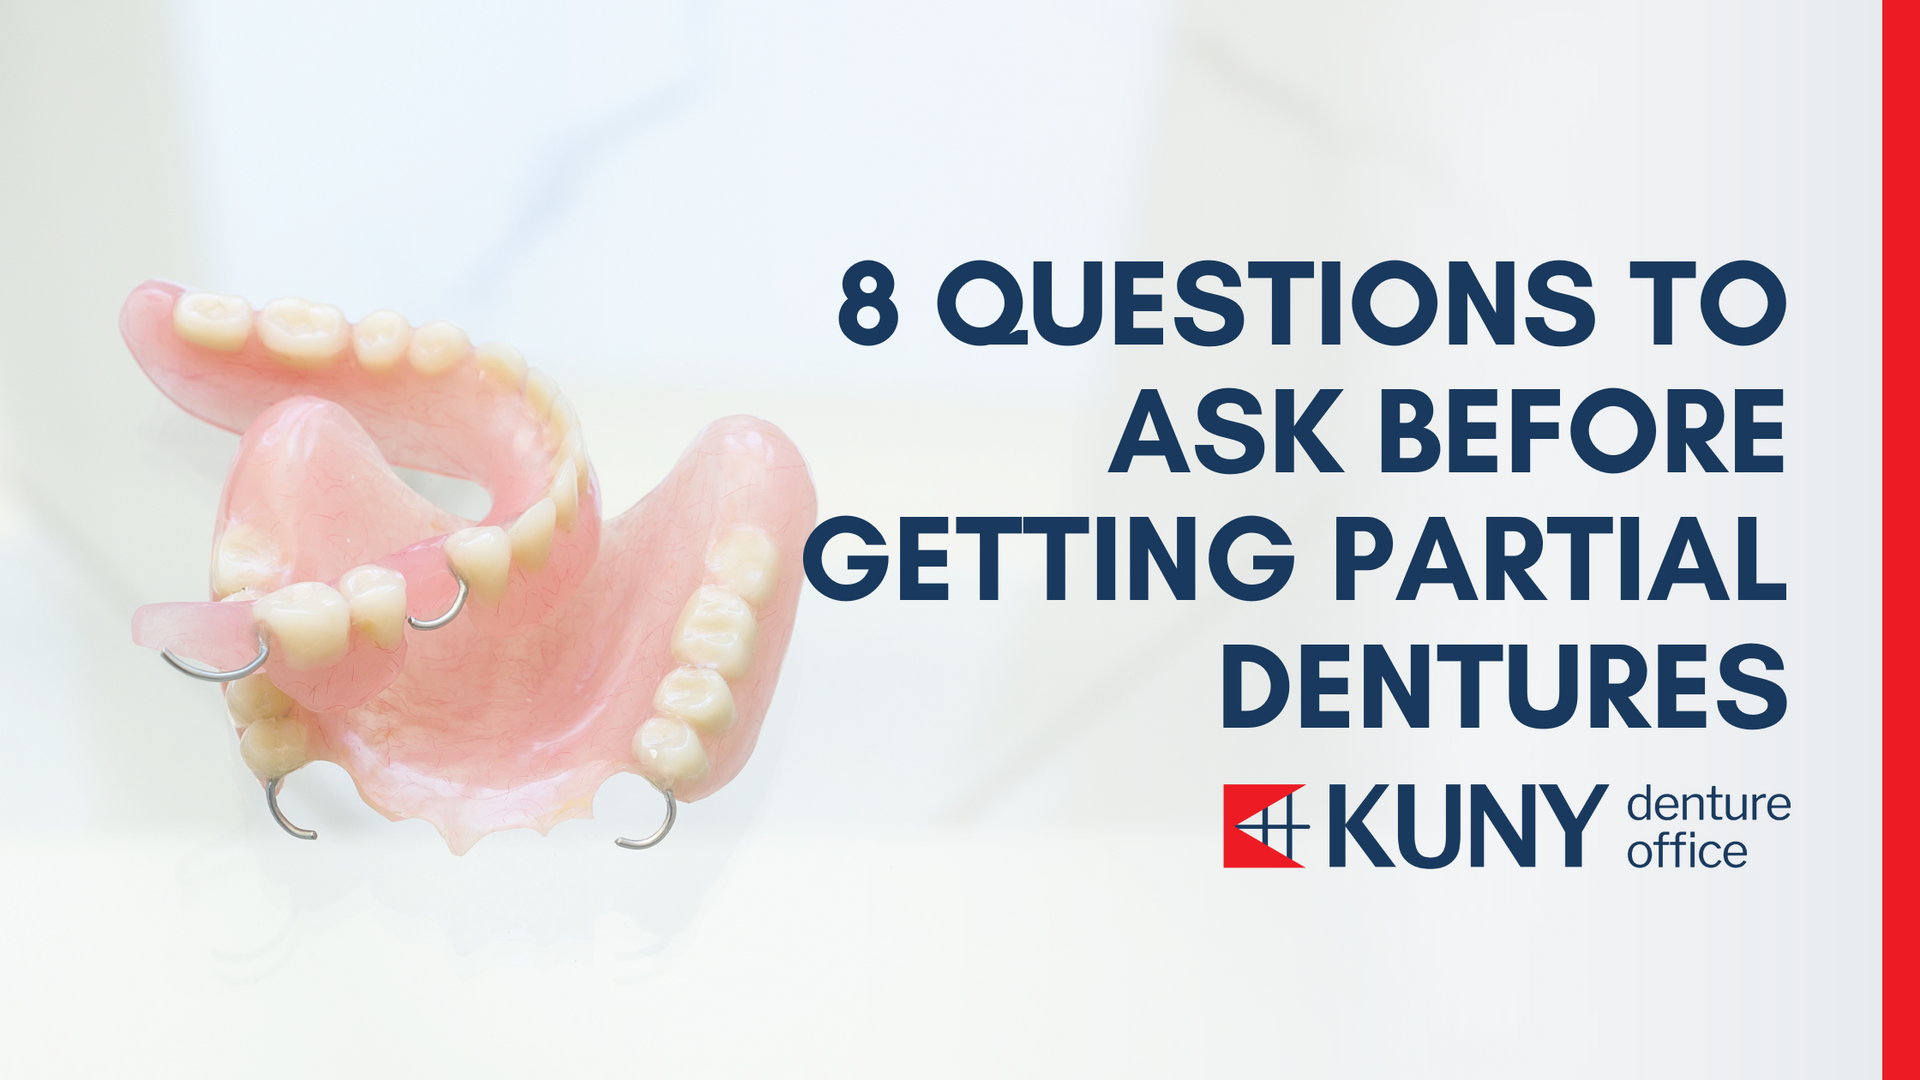 The process of getting Partial Dentures can improve the quality of your life. If you’ve been thi